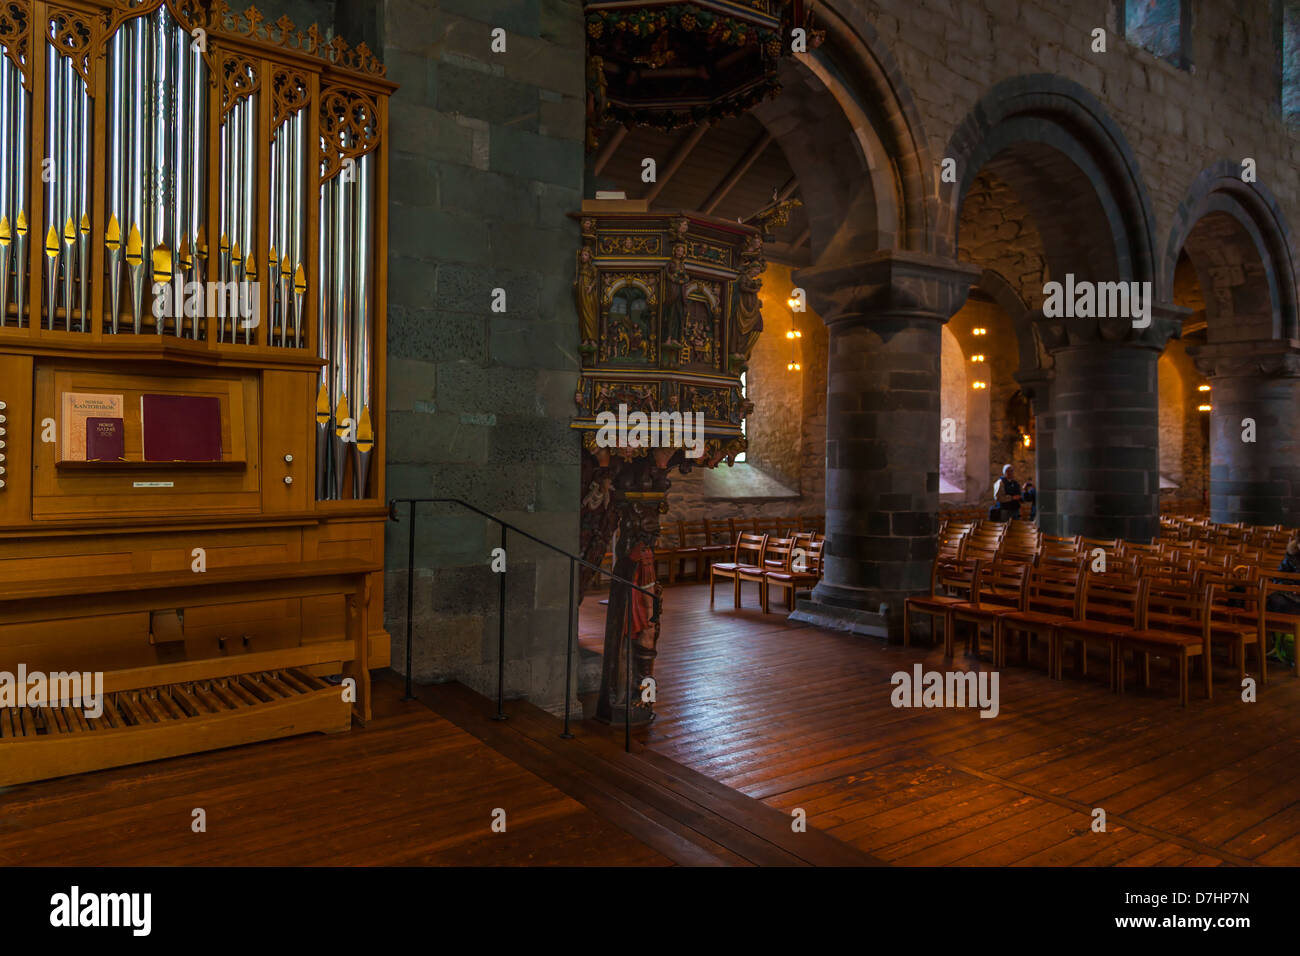 Interior of the Cathredral Stavanger Norway. Stock Photo